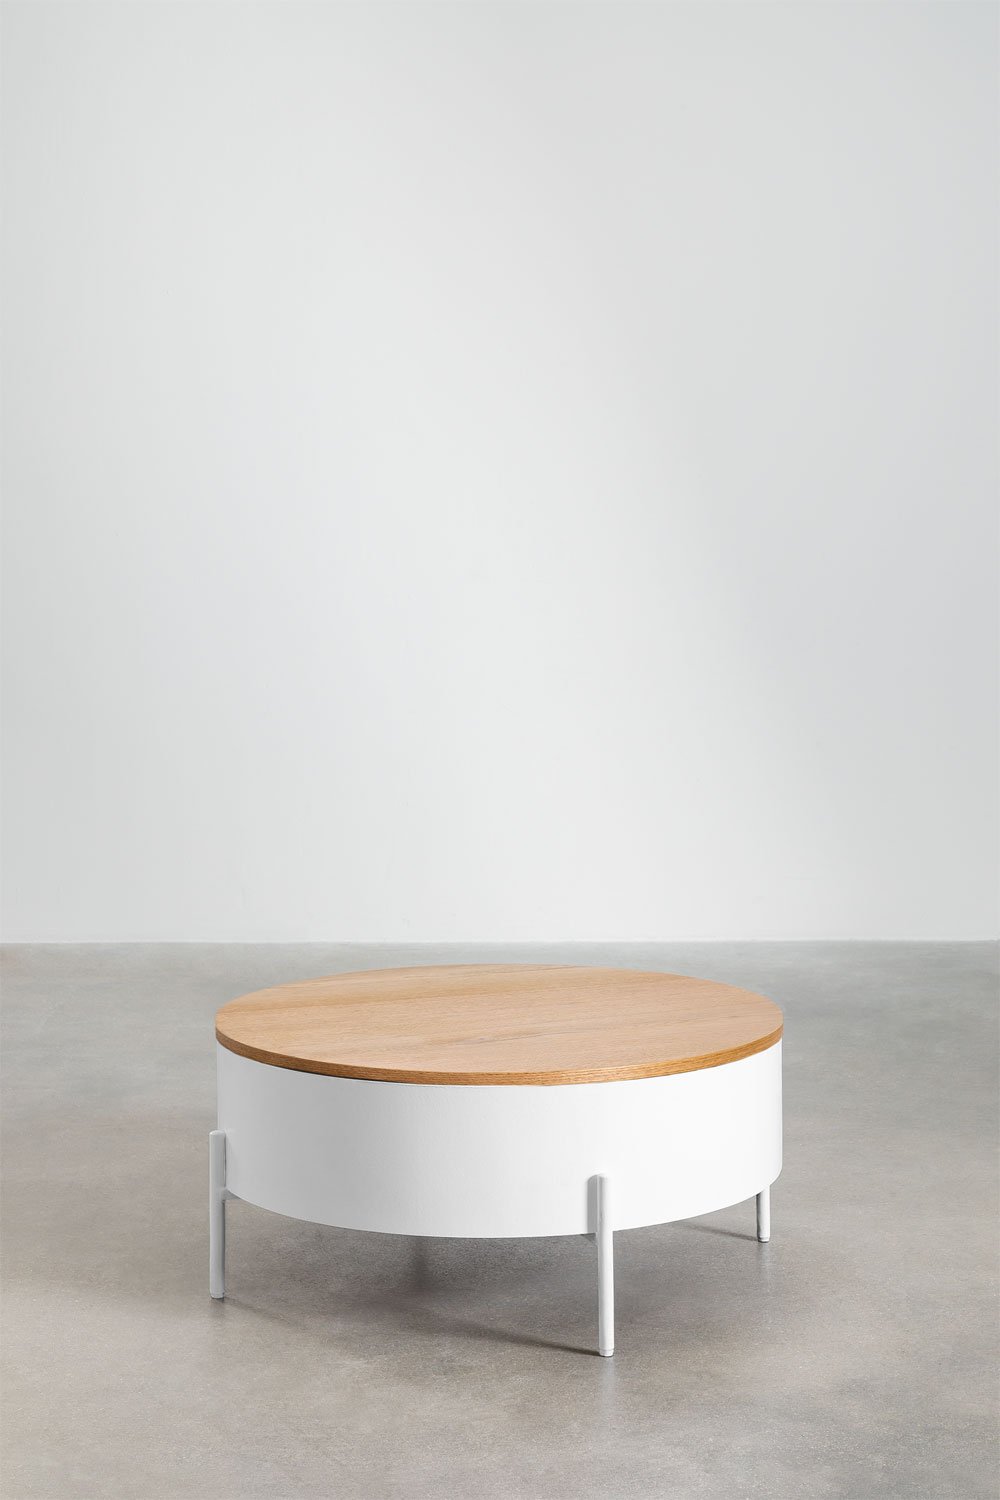 Round Elevating Coffee Table in Wood and Steel (Ø80 cm) Tainara, gallery image 1